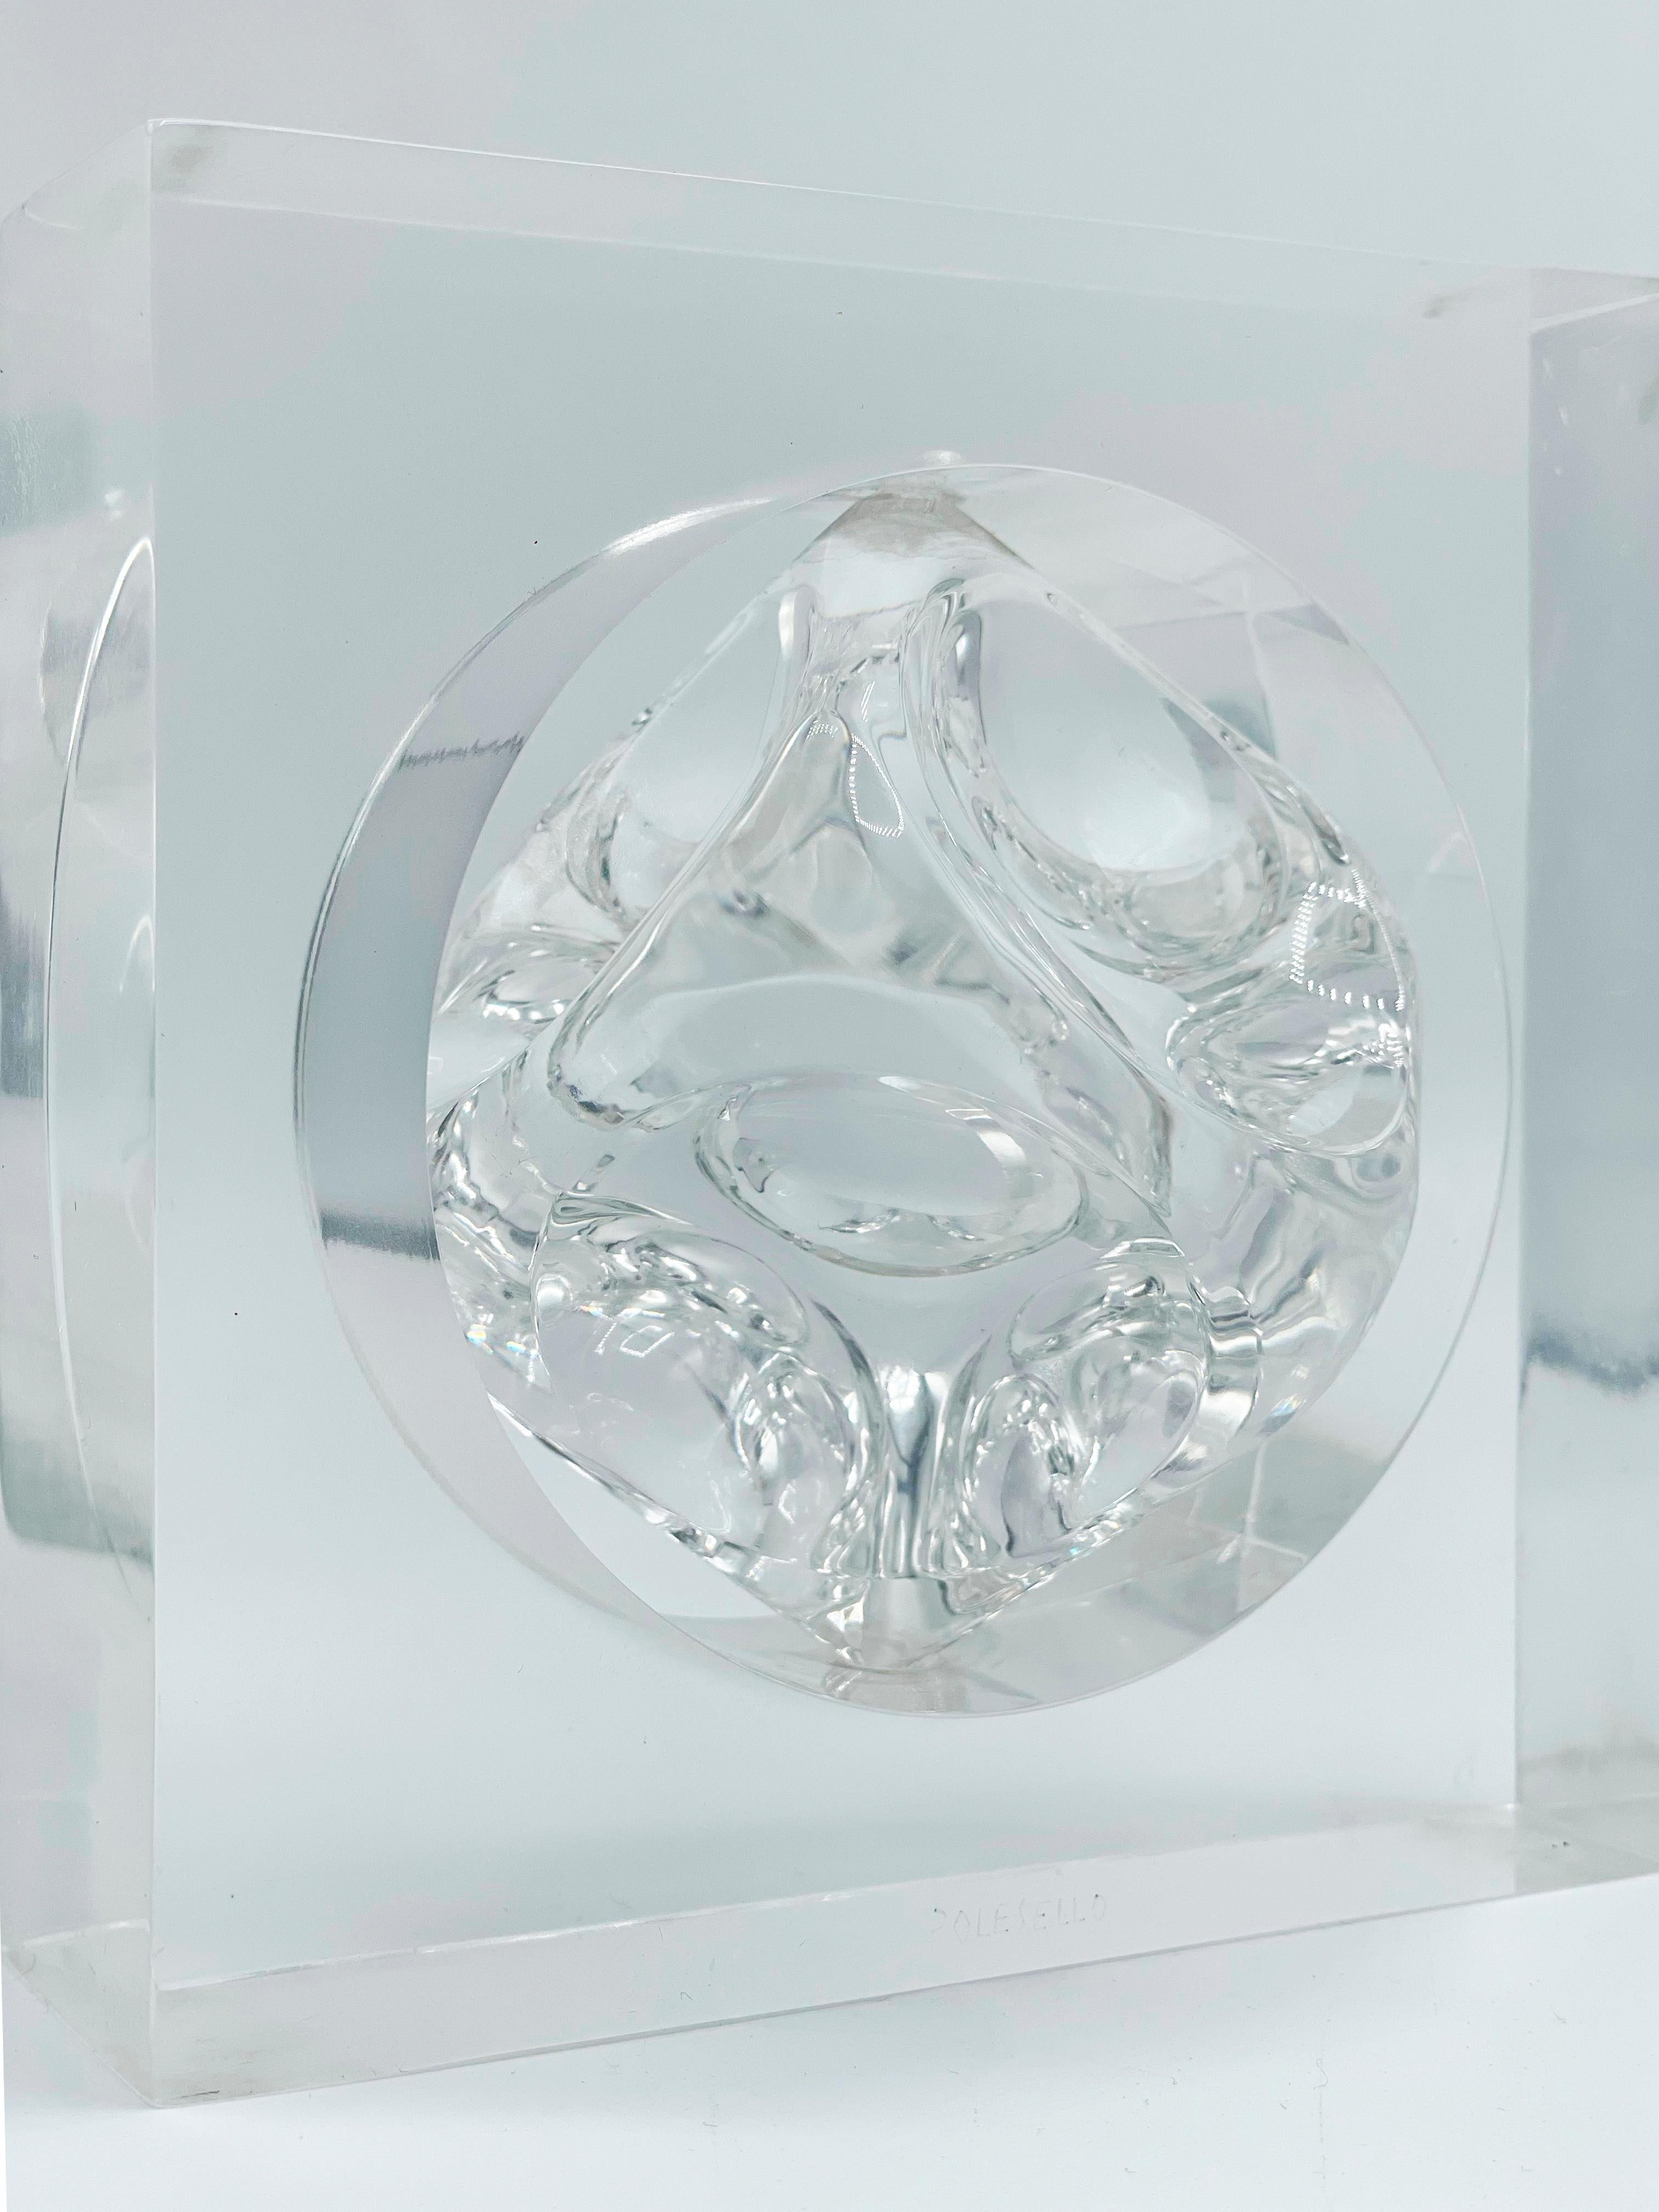 Transparent acrylic sculpture by Rogelio Polesello, with a moving cubic center. This particular piece plays with optical illusion due to transparency and light bounces.
A little about Polesello:
Polesello's works combine geometric shapes with